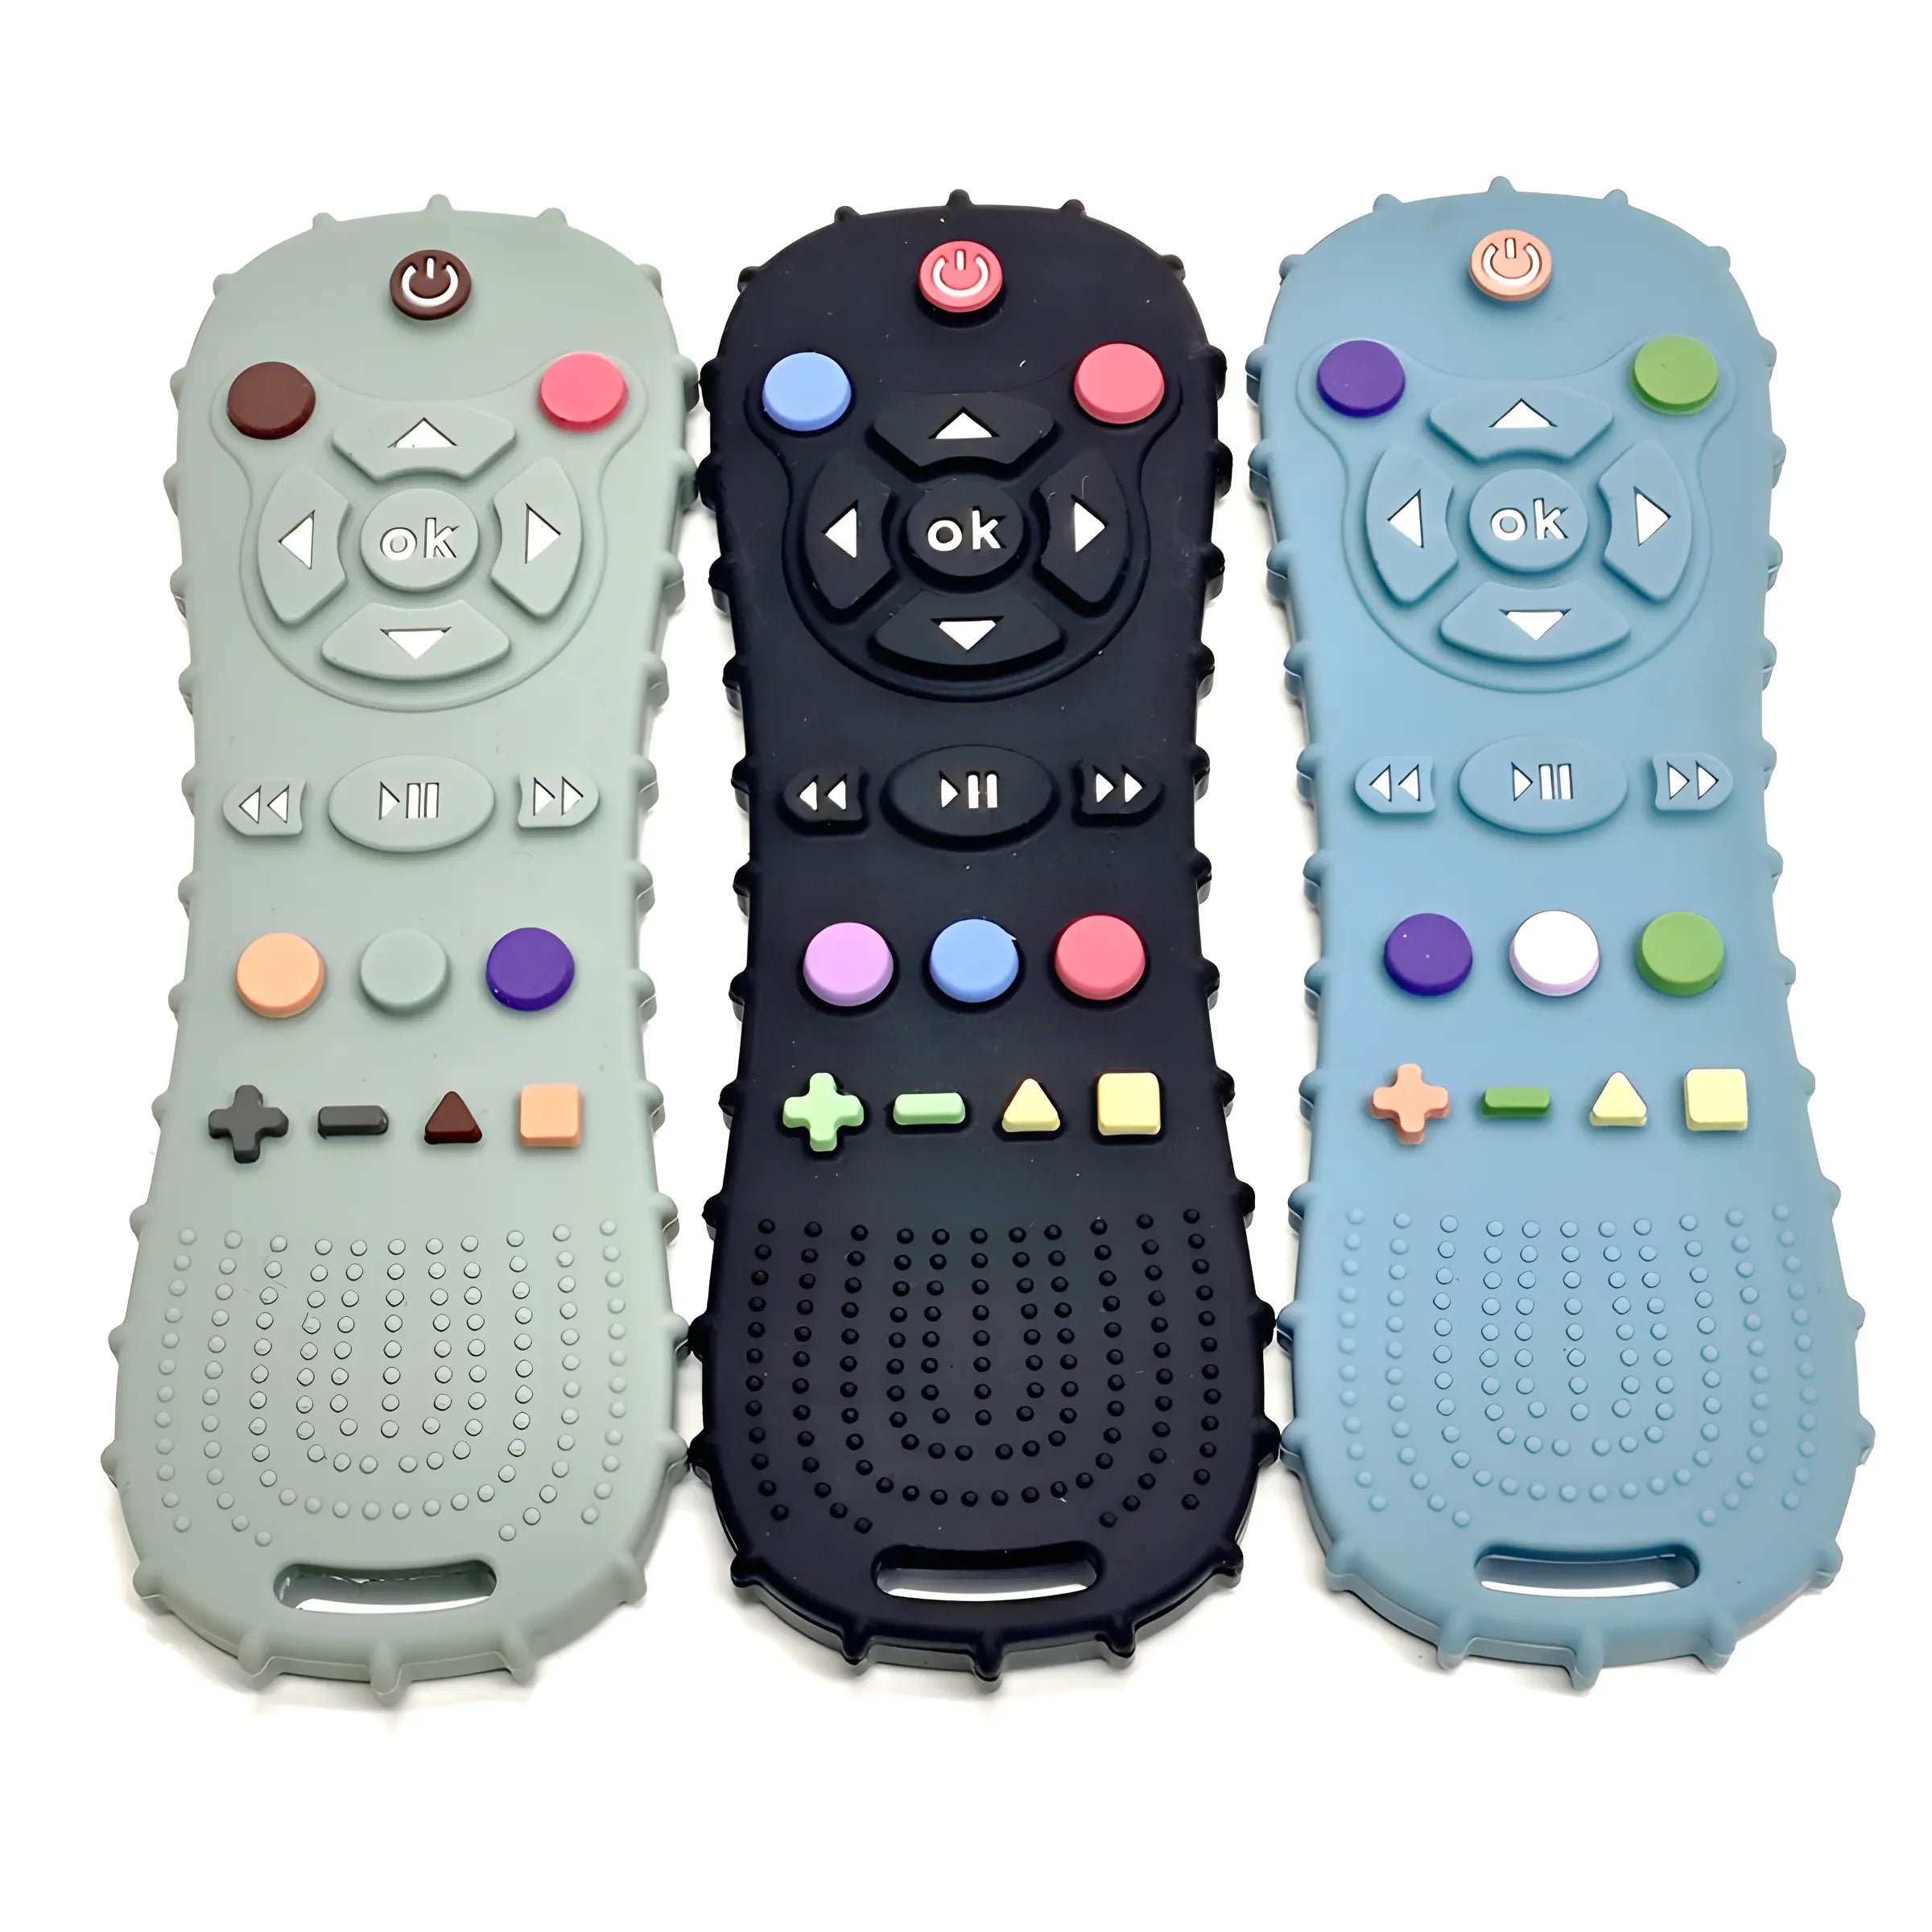 Remote Control Teether: Innovative Baby Teething Solution